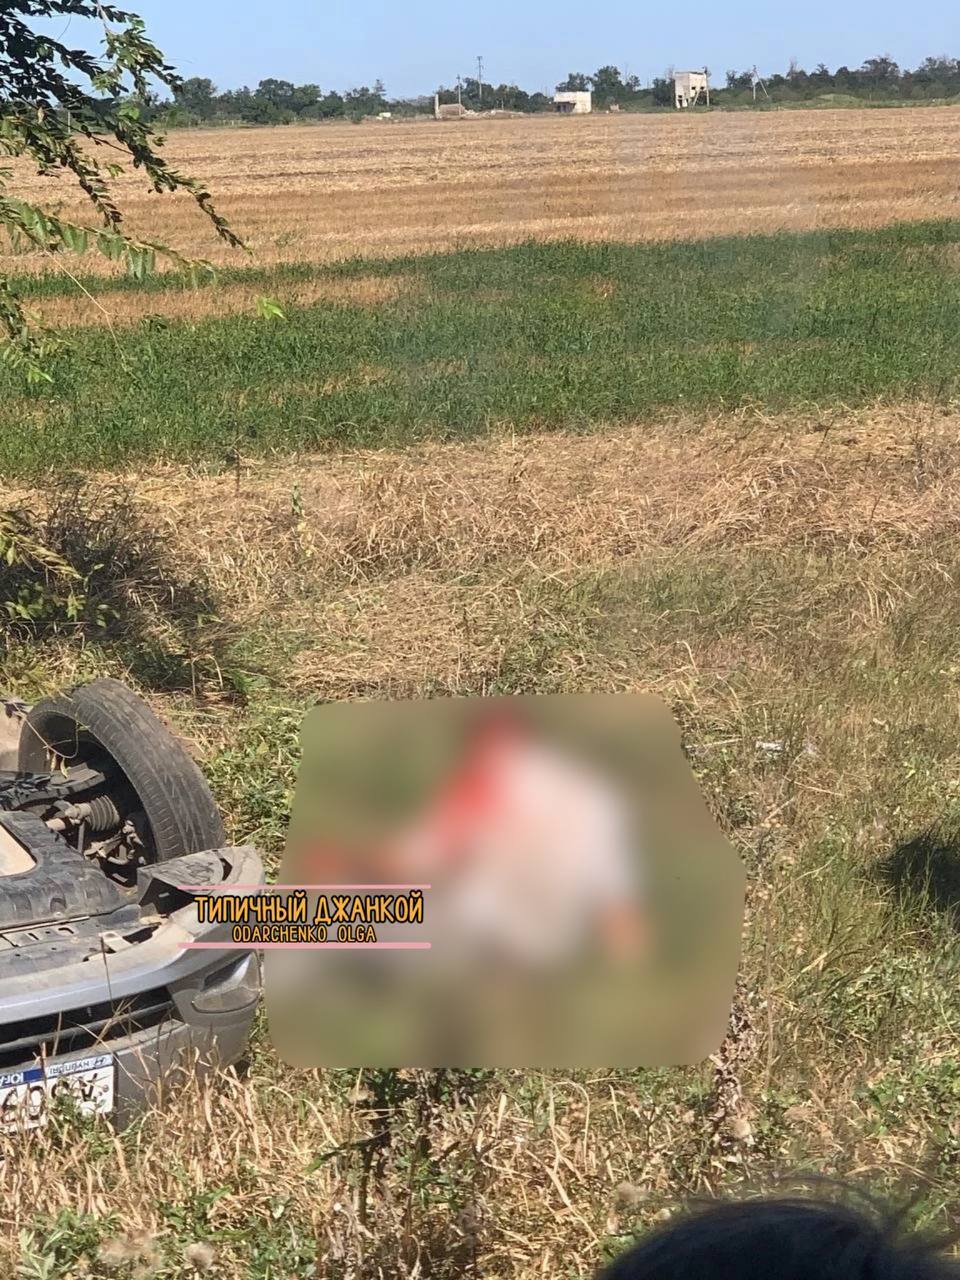 In the occupied Crimea Russian Ural demolished a passenger car: two people were killed. Photo